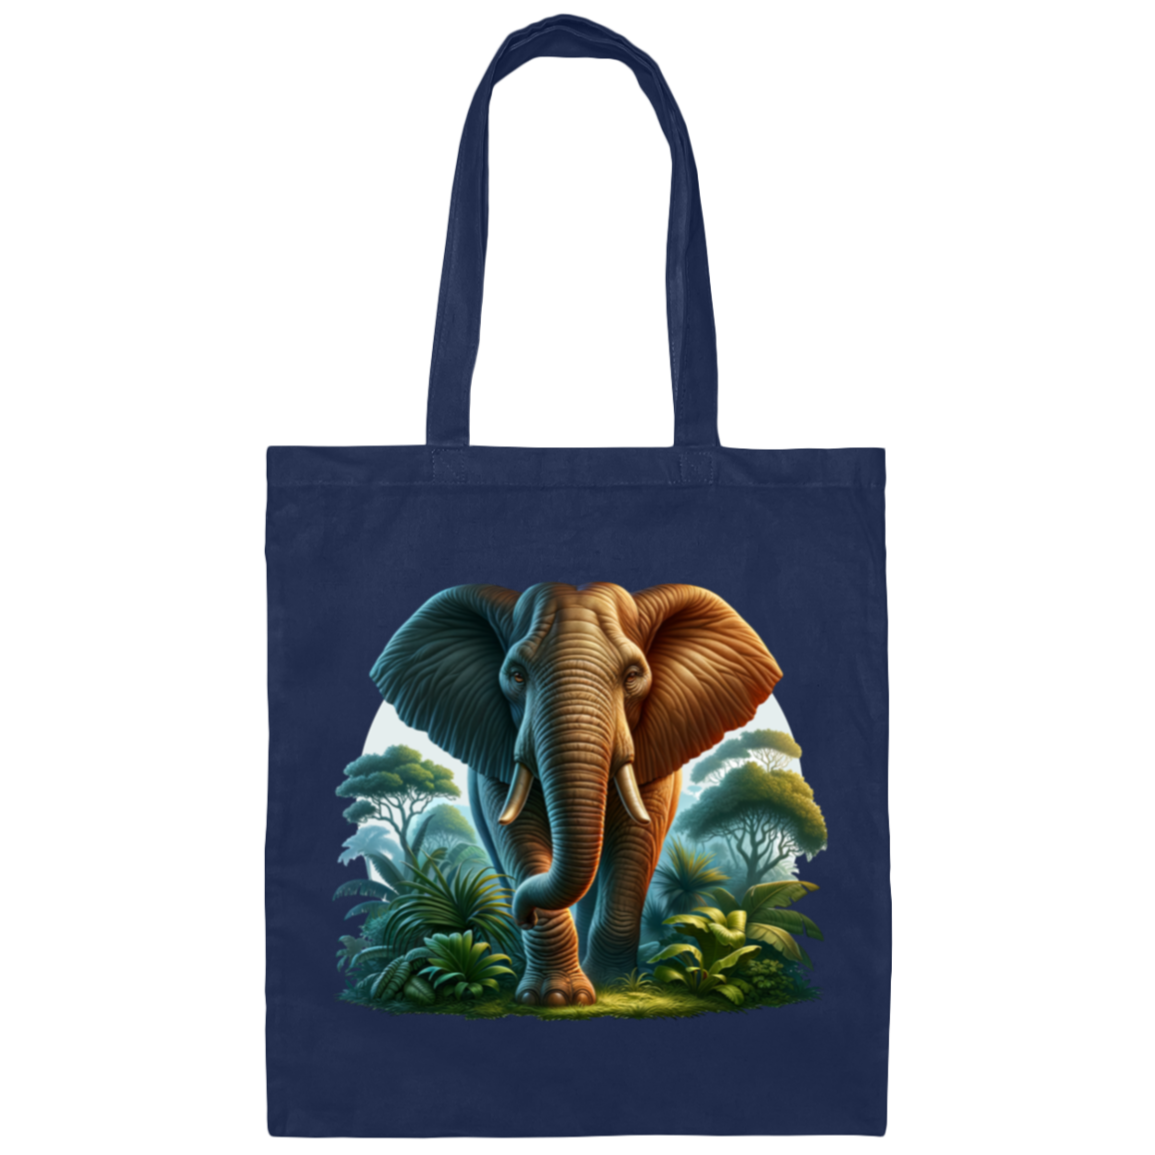 Elephant in Jungle - Canvas Tote Bag